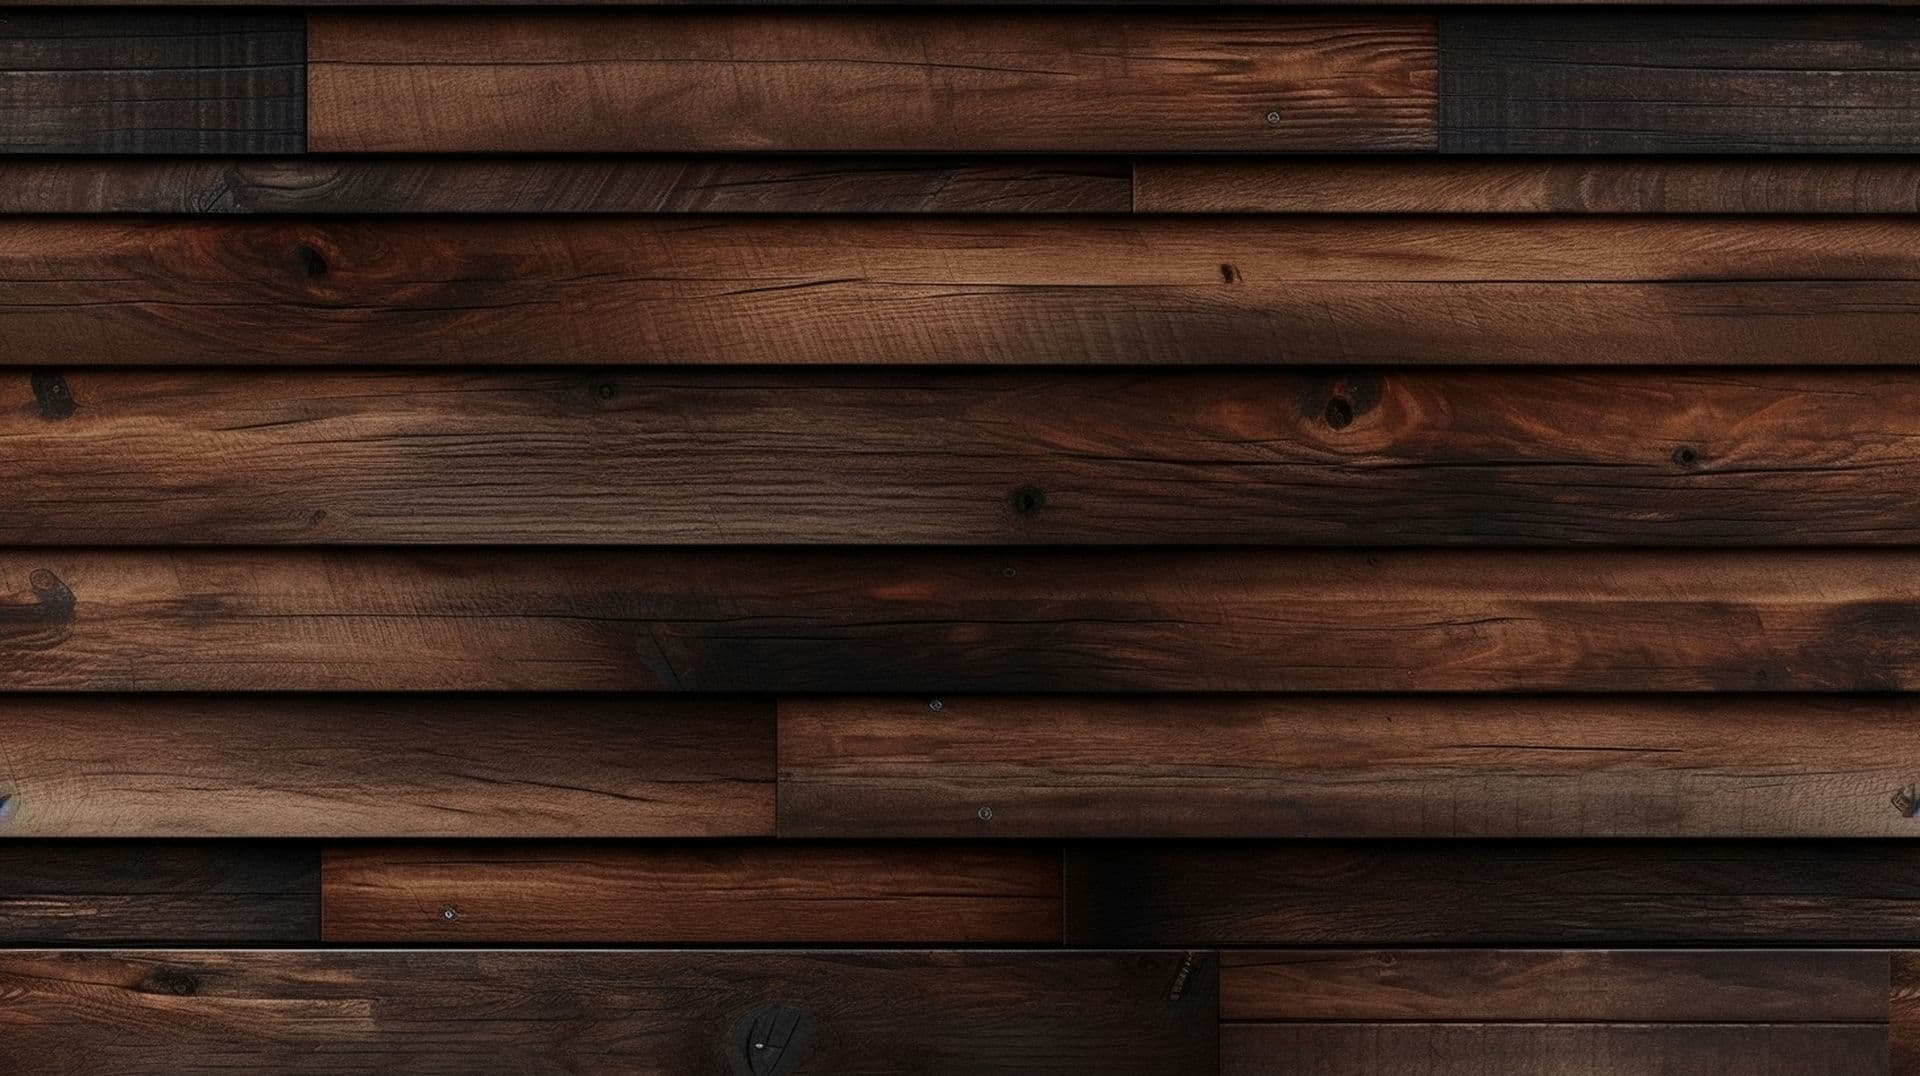 A close up of a wooden wall - Woods